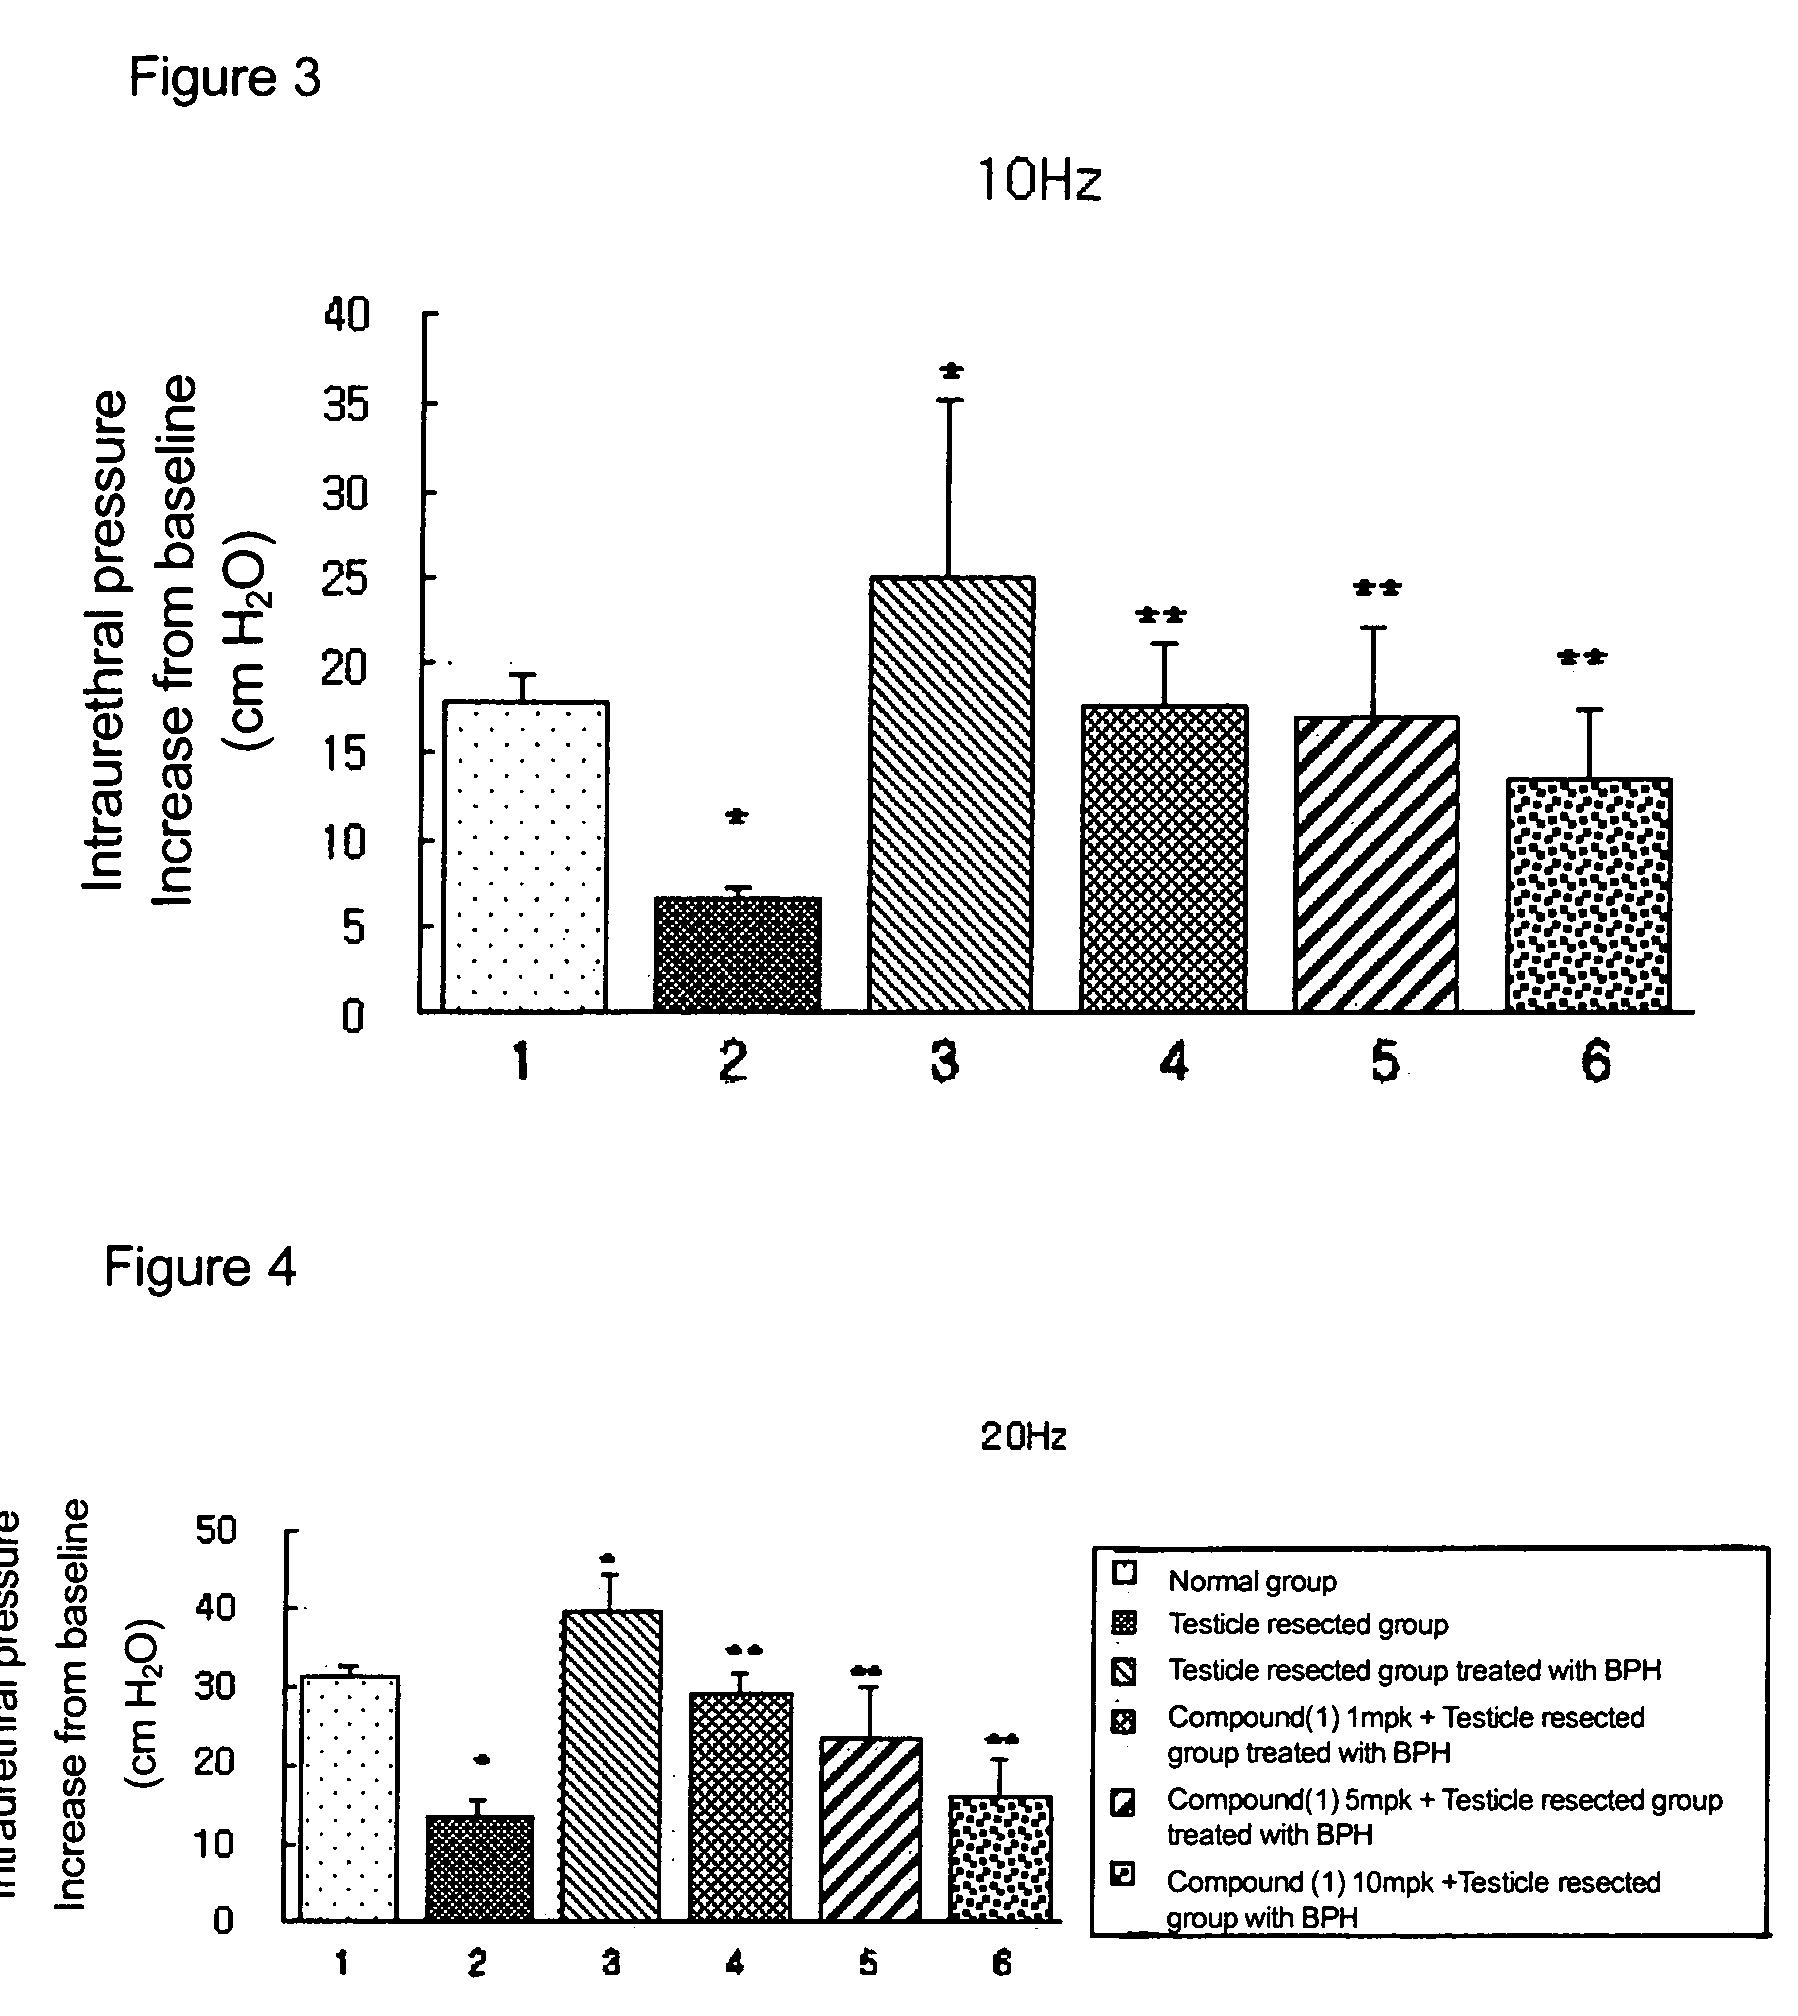 Agent for the prevention and treatment of prostatic hyperplasia comprising pyrazolopyrimidinone compound